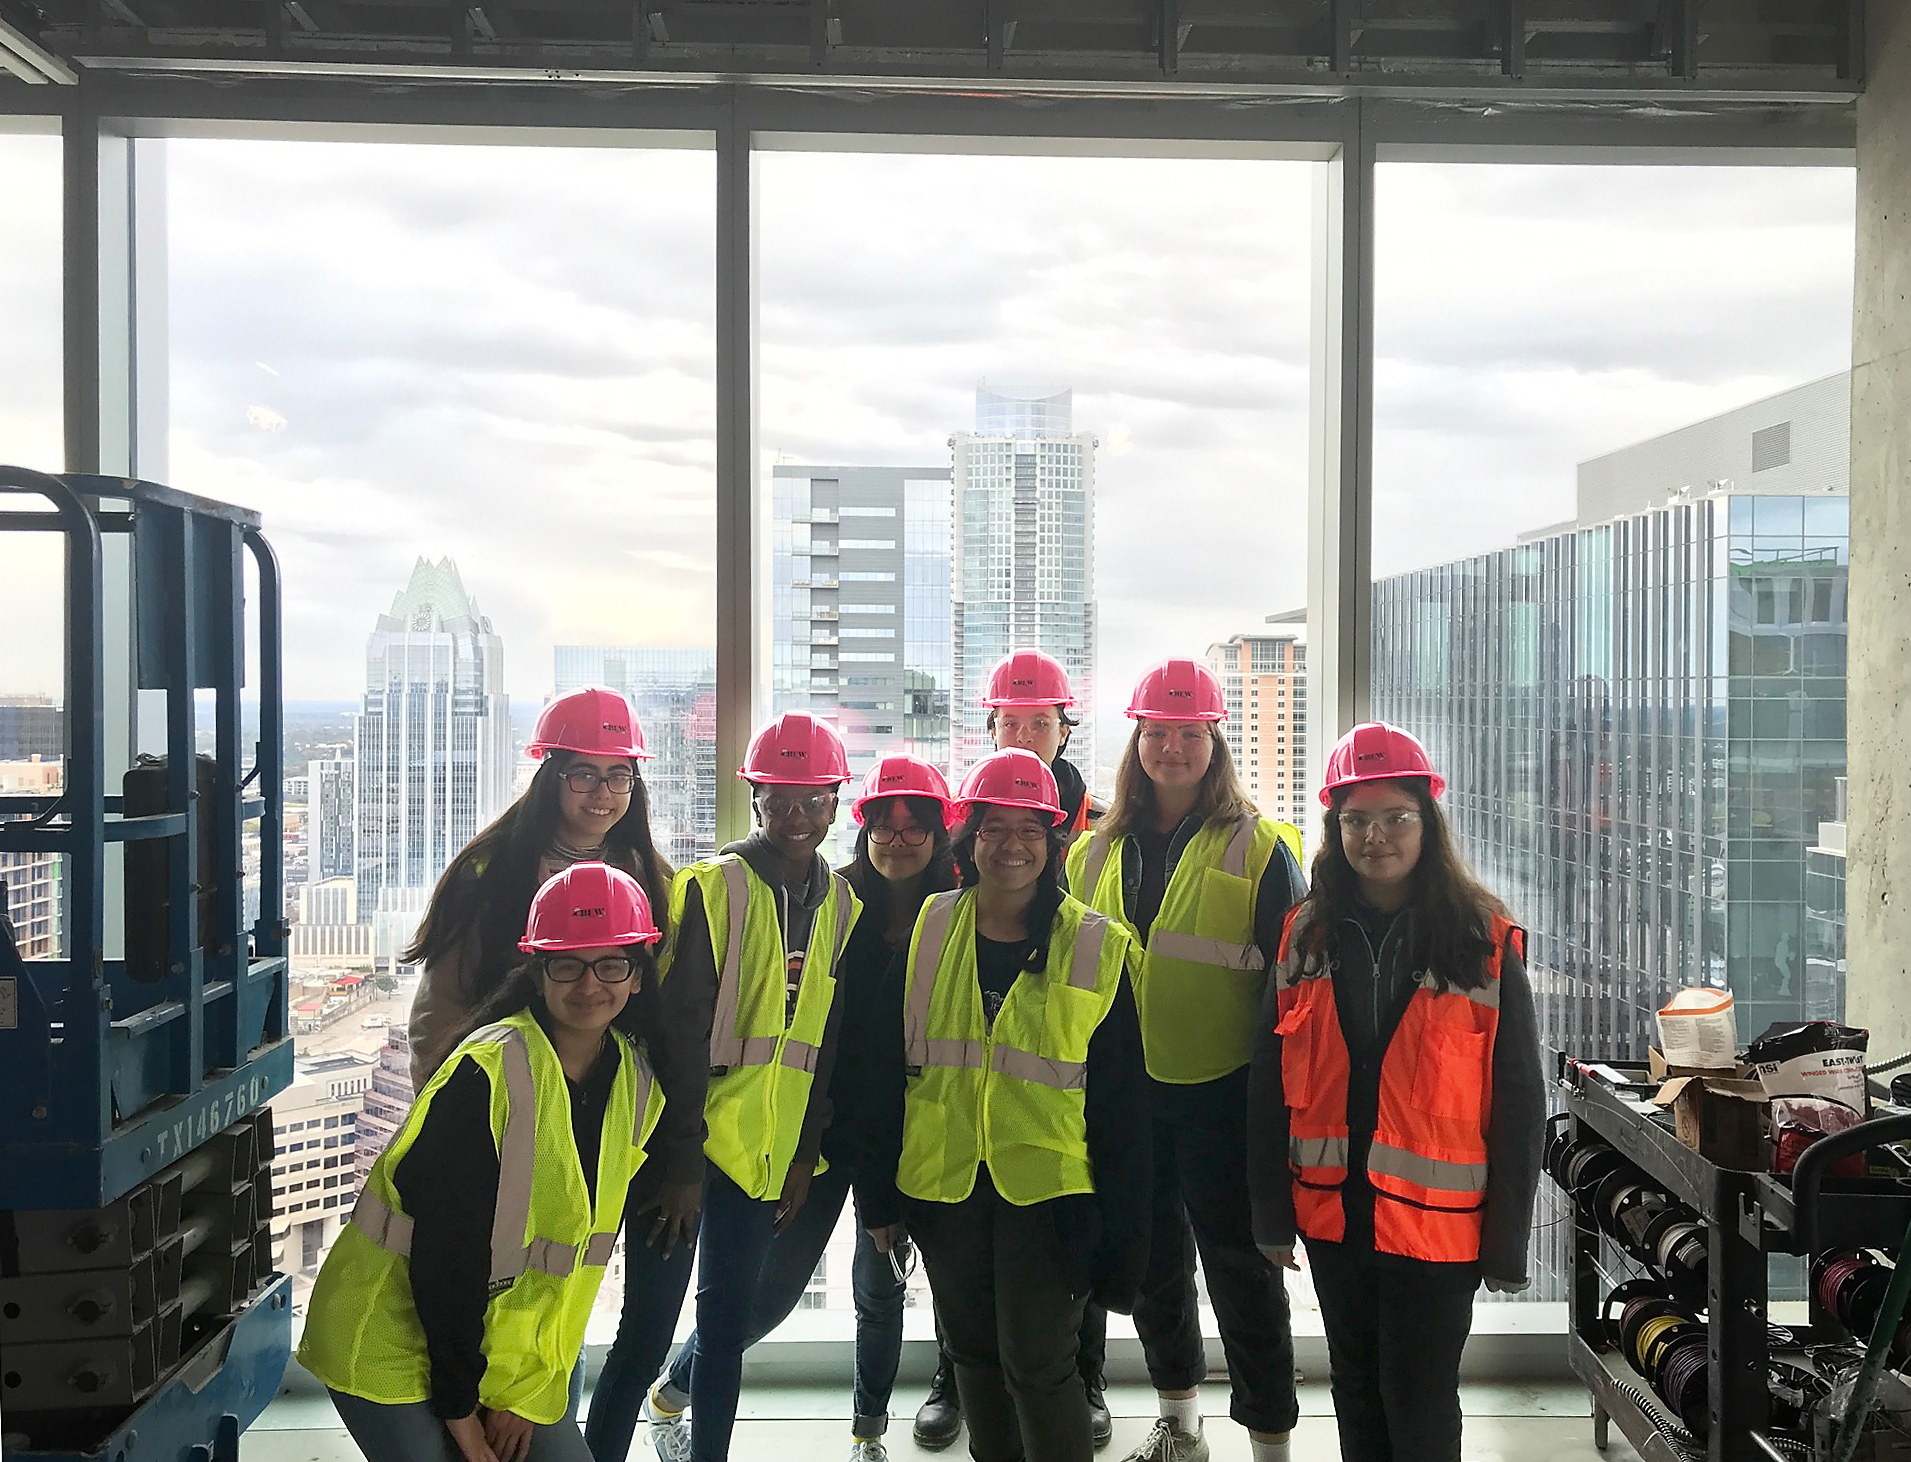 Several women in high-visibility jackets in a skyscraper work-site